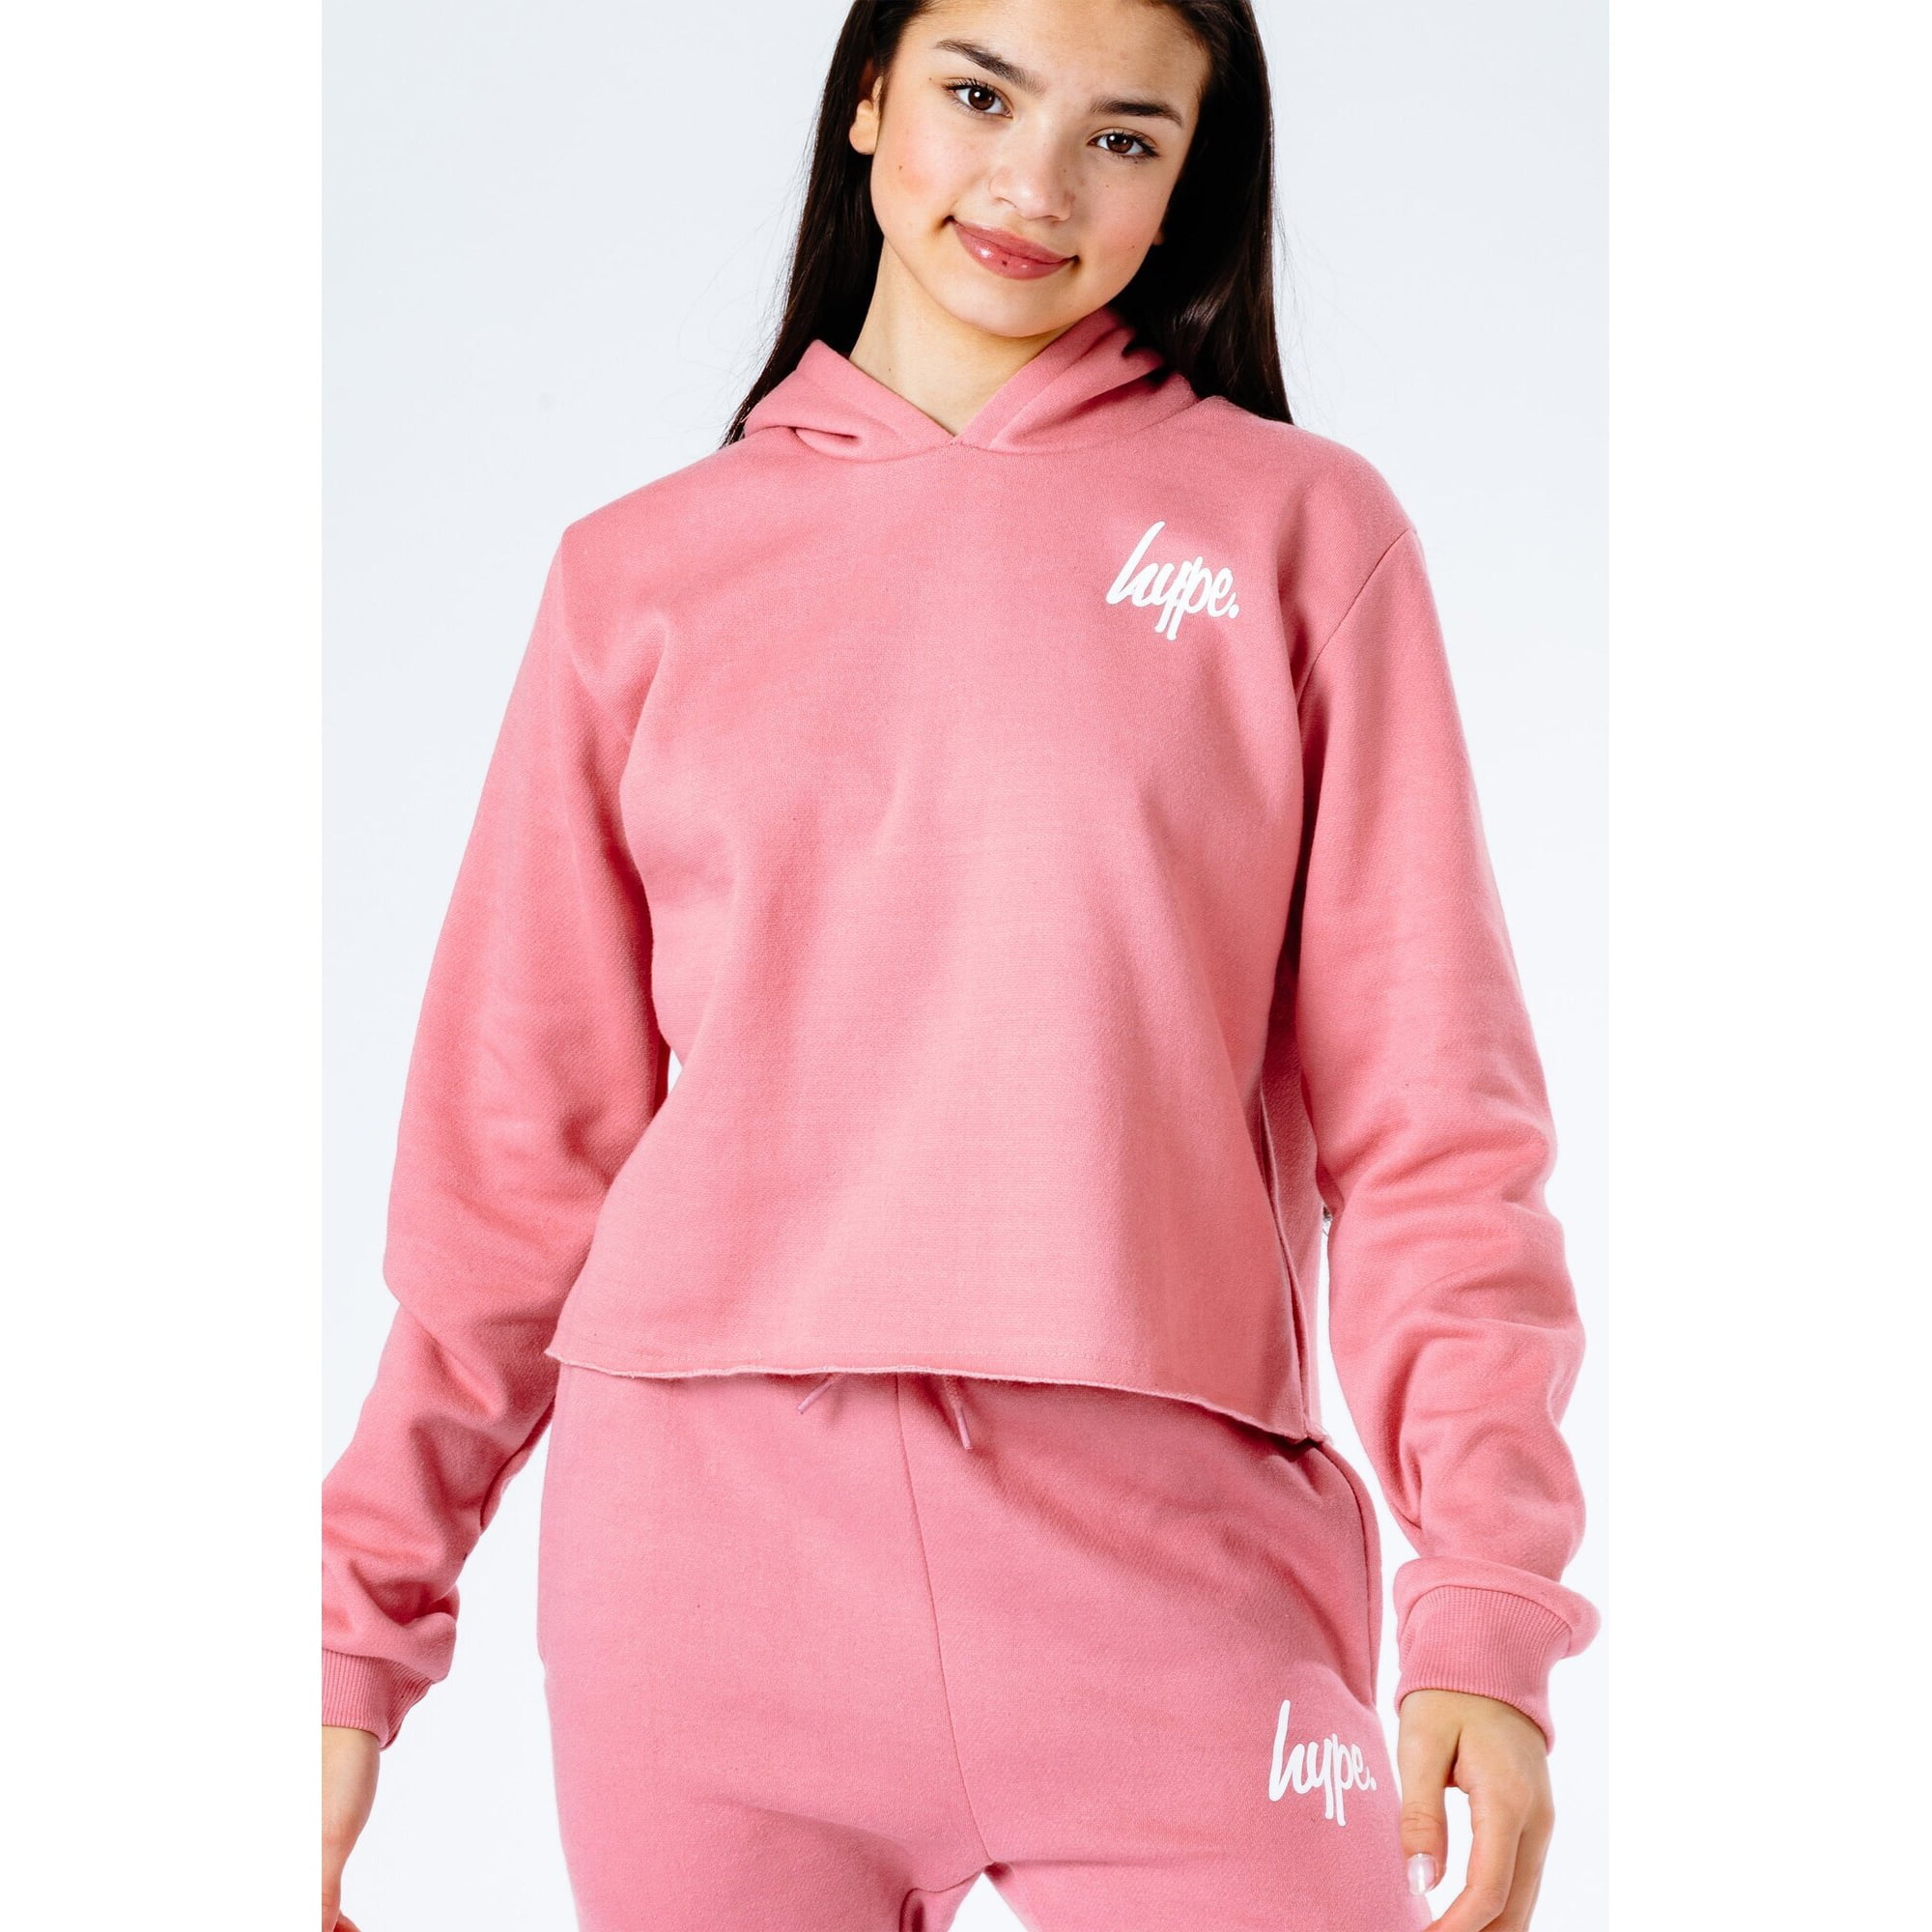 Hype Crop Pullover Hoodie and Jogger Set Girls Tracksuit Hoody Hooded Top Jumper 